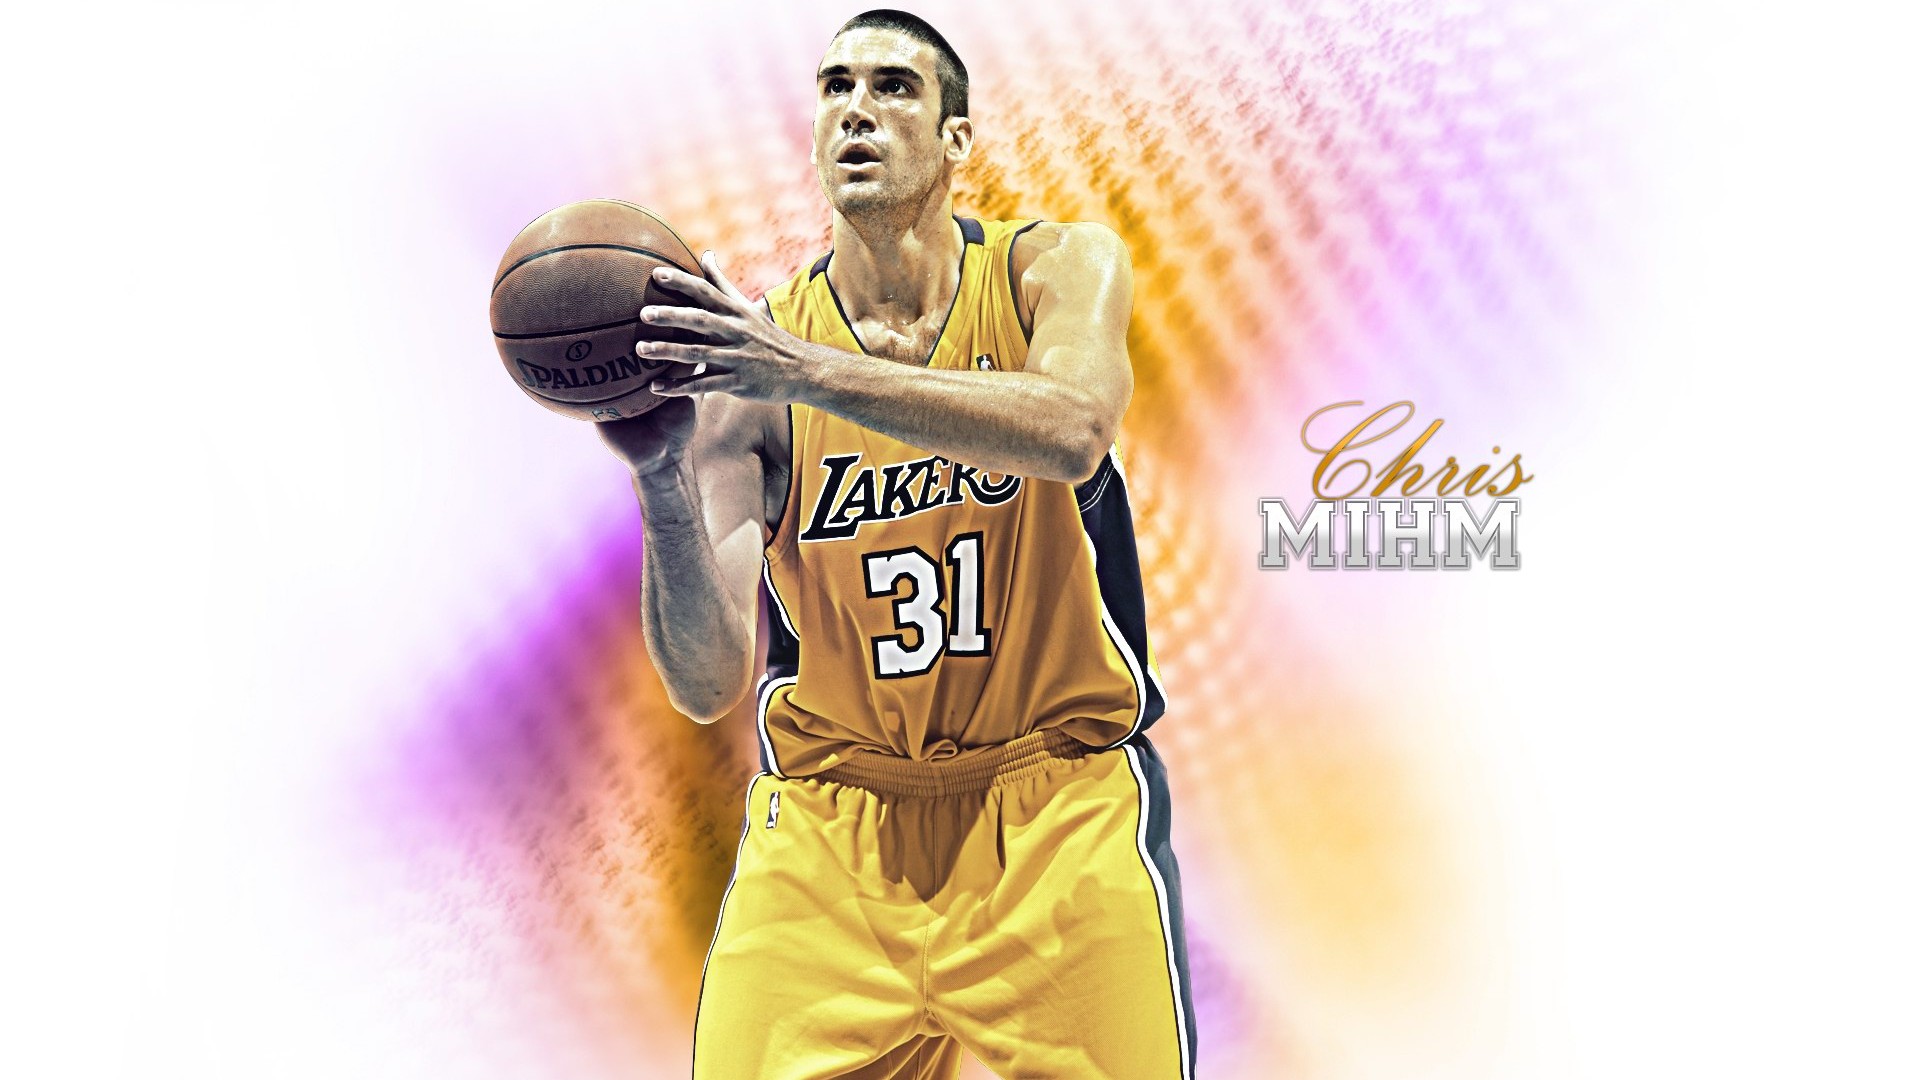 Los Angeles Lakers Official Wallpaper #5 - 1920x1080